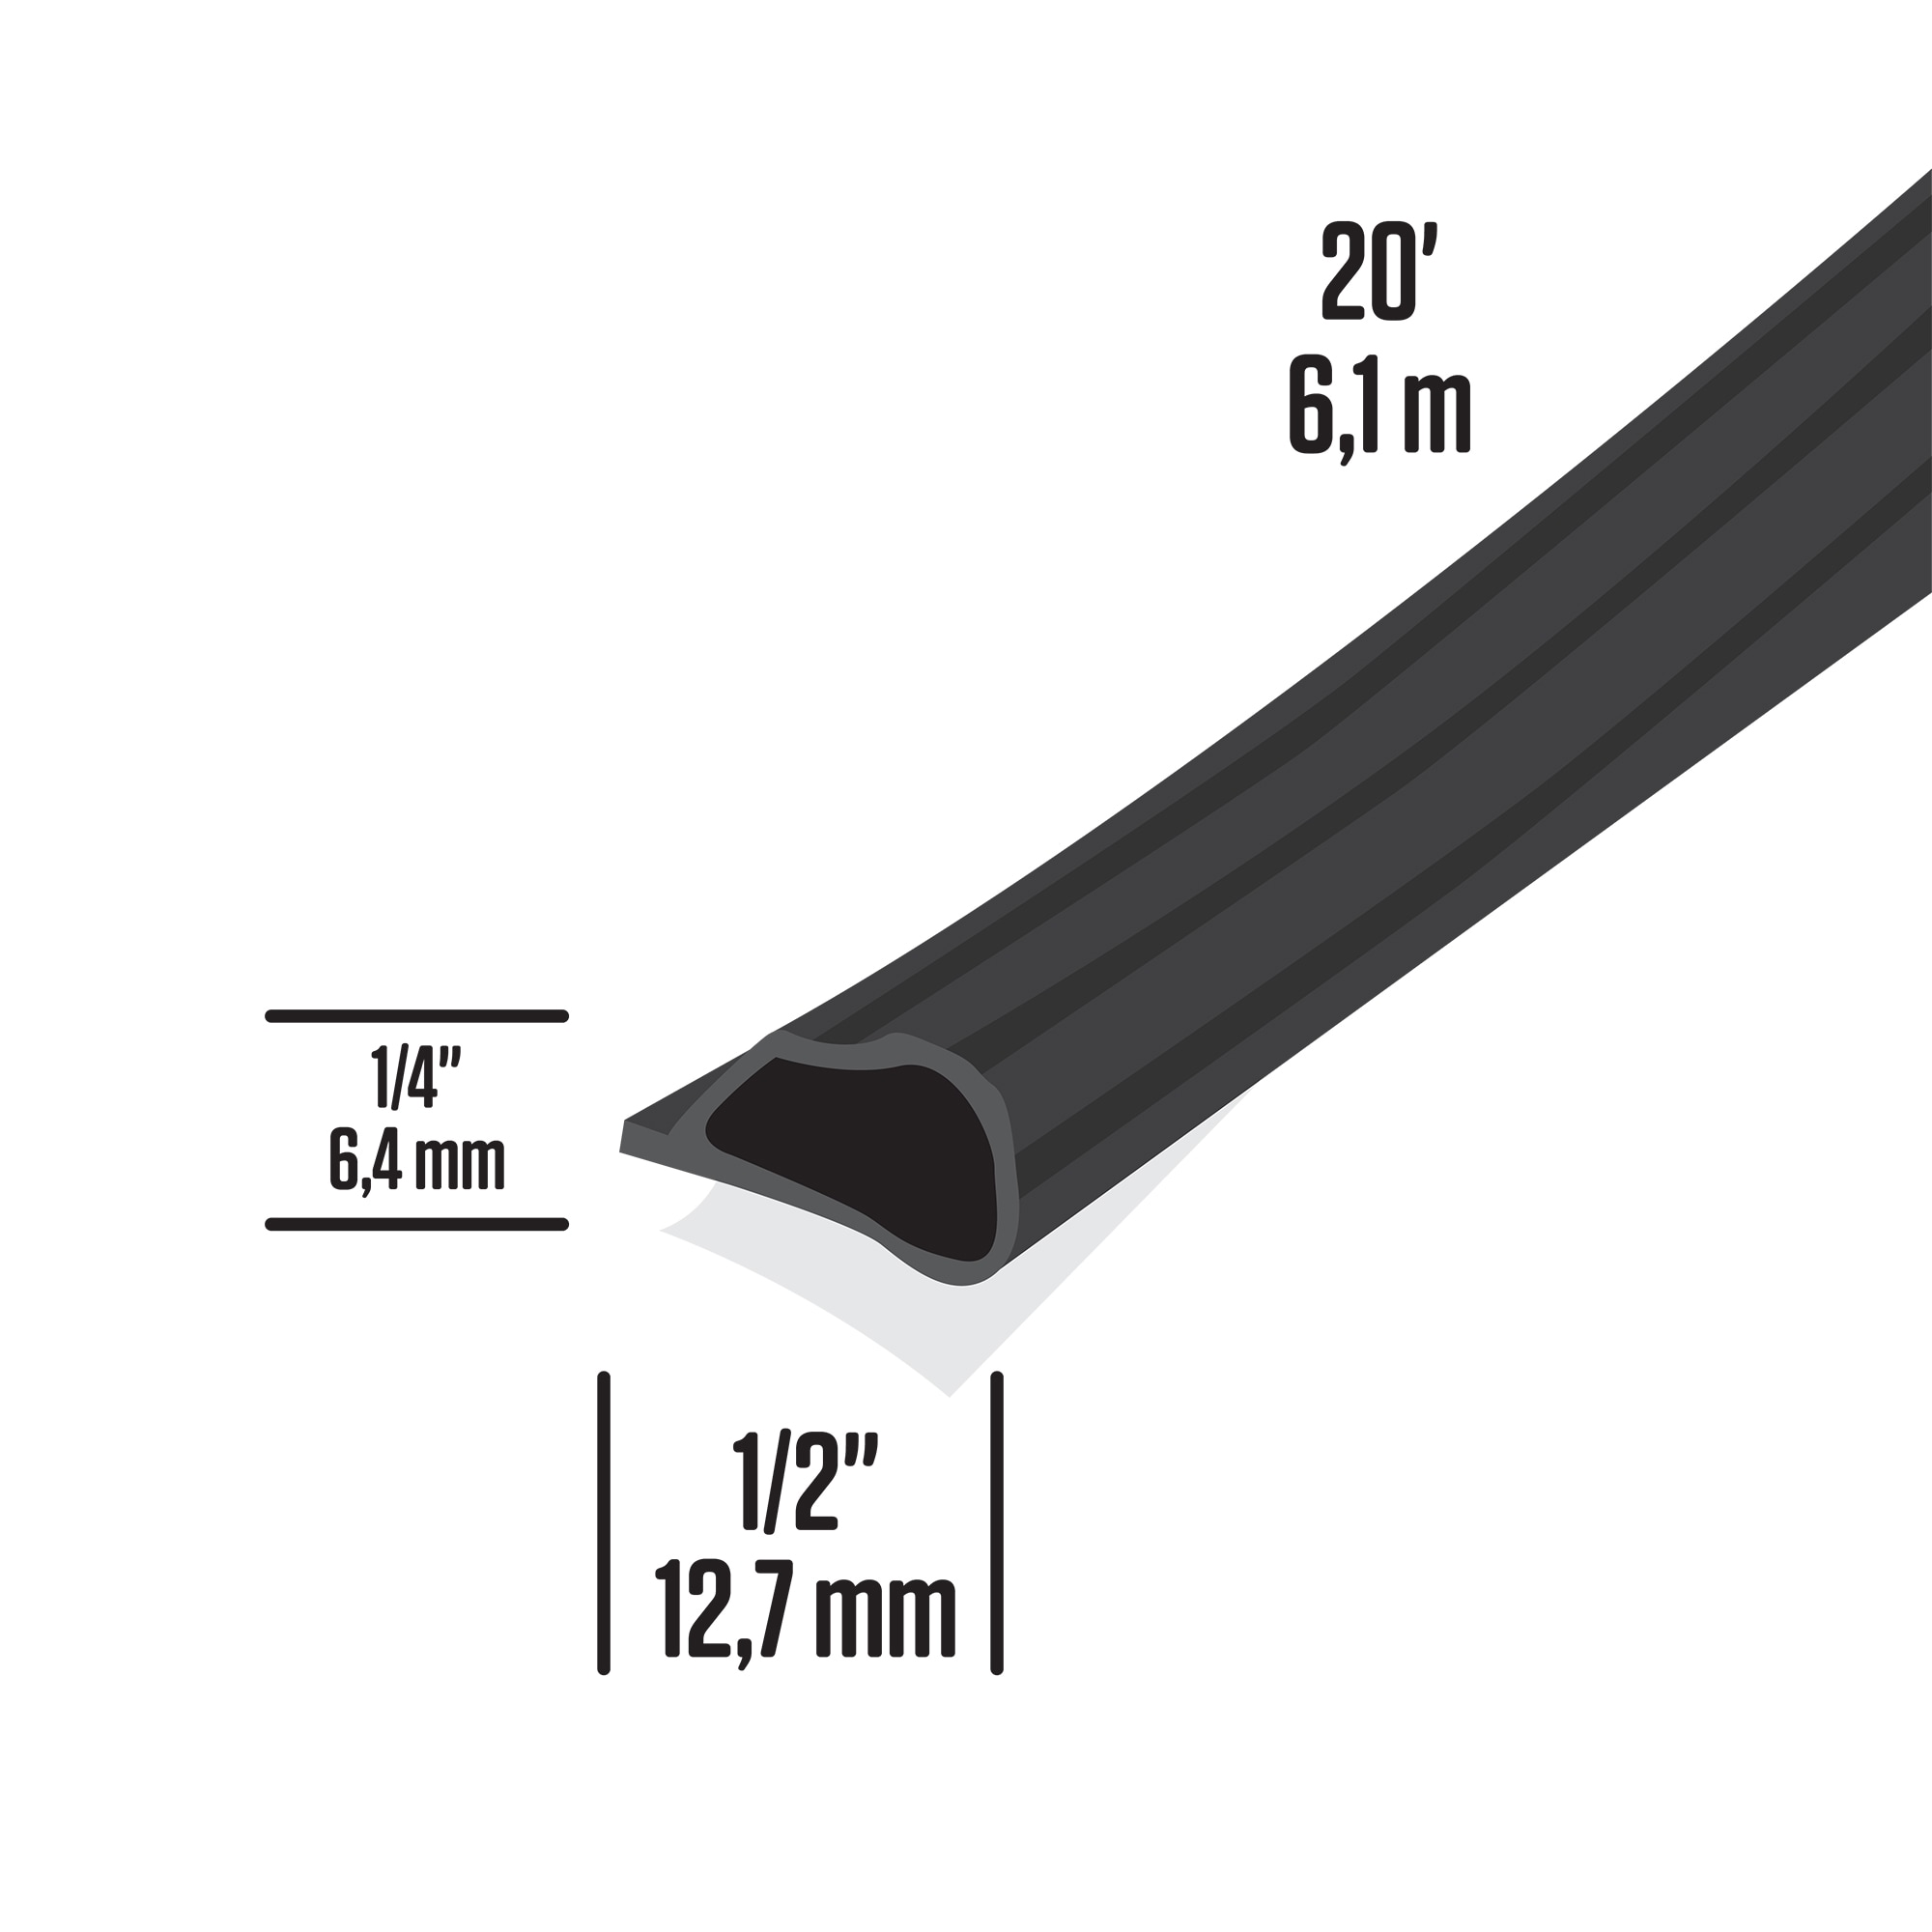 M-D Building Products 20 ft. Black Silicone Gasket Seal for Doors and  Windows 68668 - The Home Depot